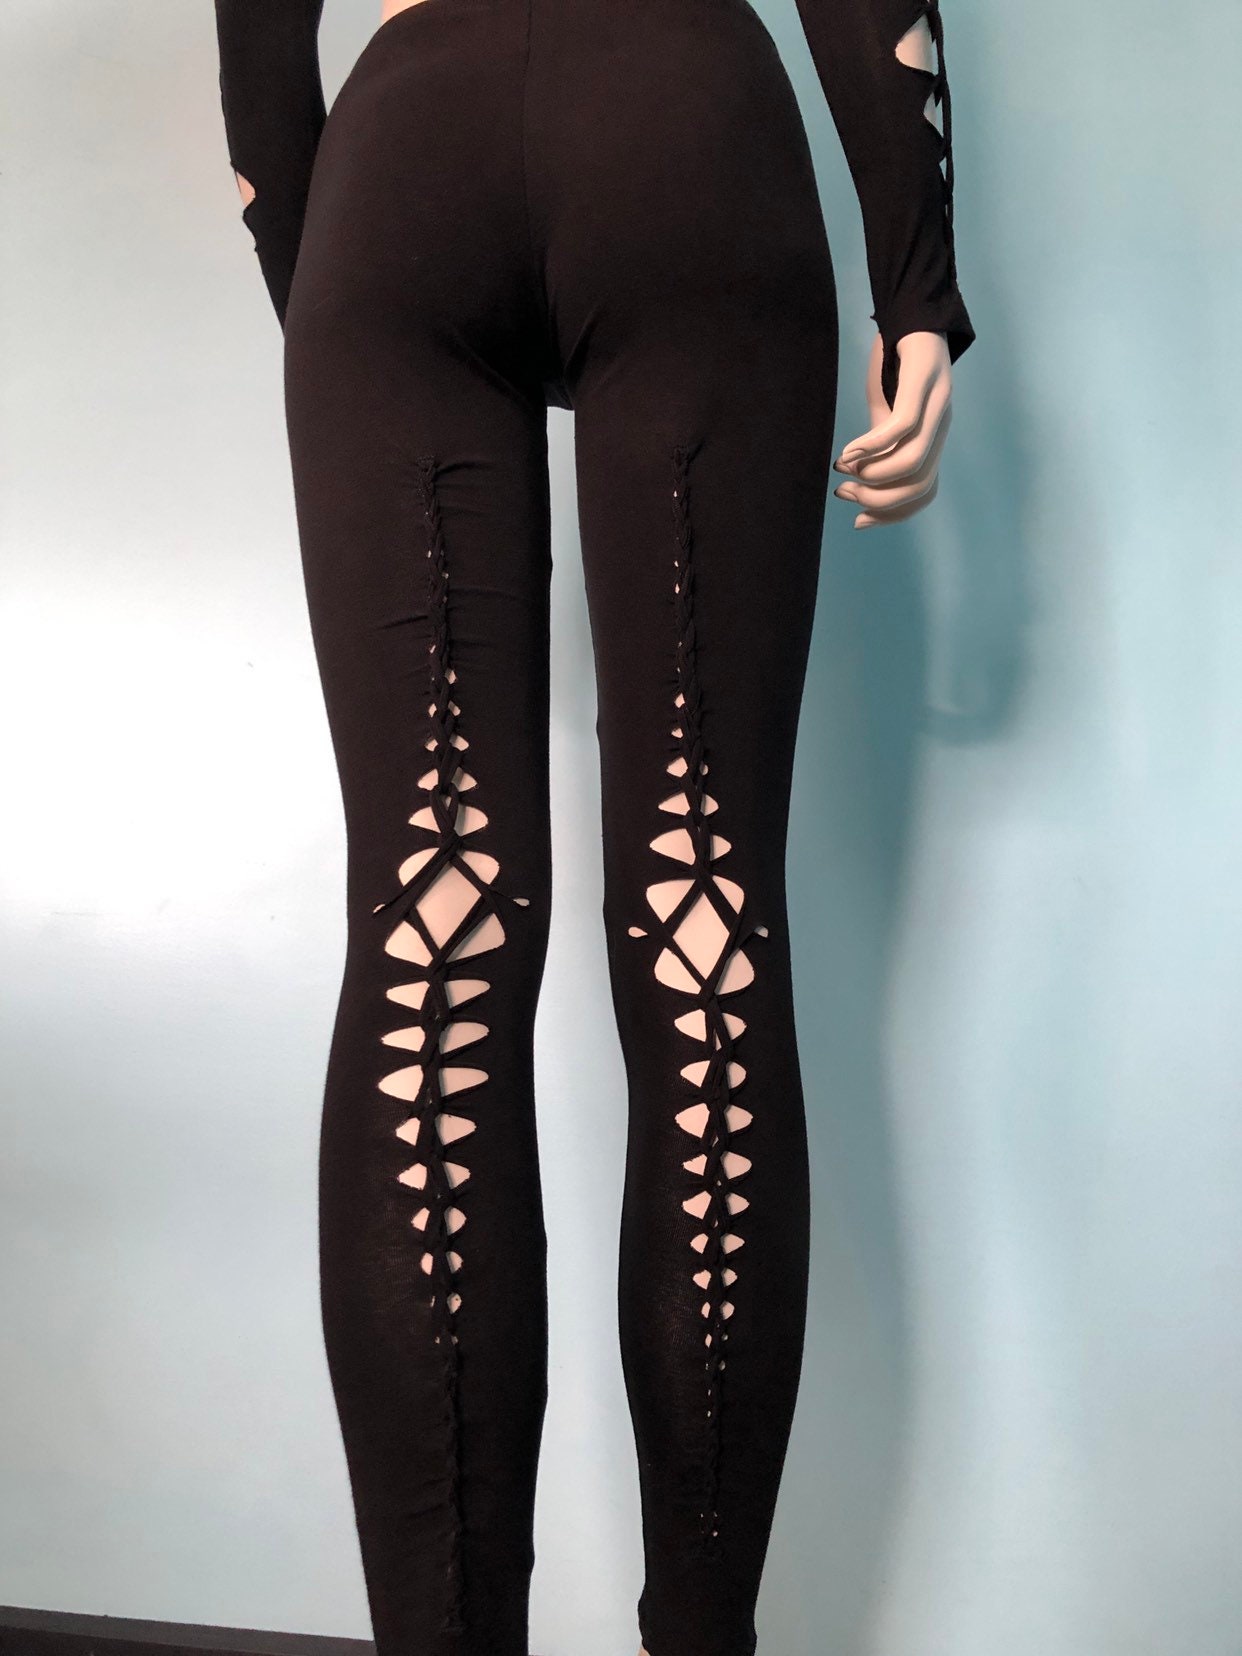 Slit Weave Leggings Sexy Burner Back Cut Leggings Bow Tie Tights Post  Apocalyptic Leggings Festival Outfit Cut Out Yoga Pants Black Friday 